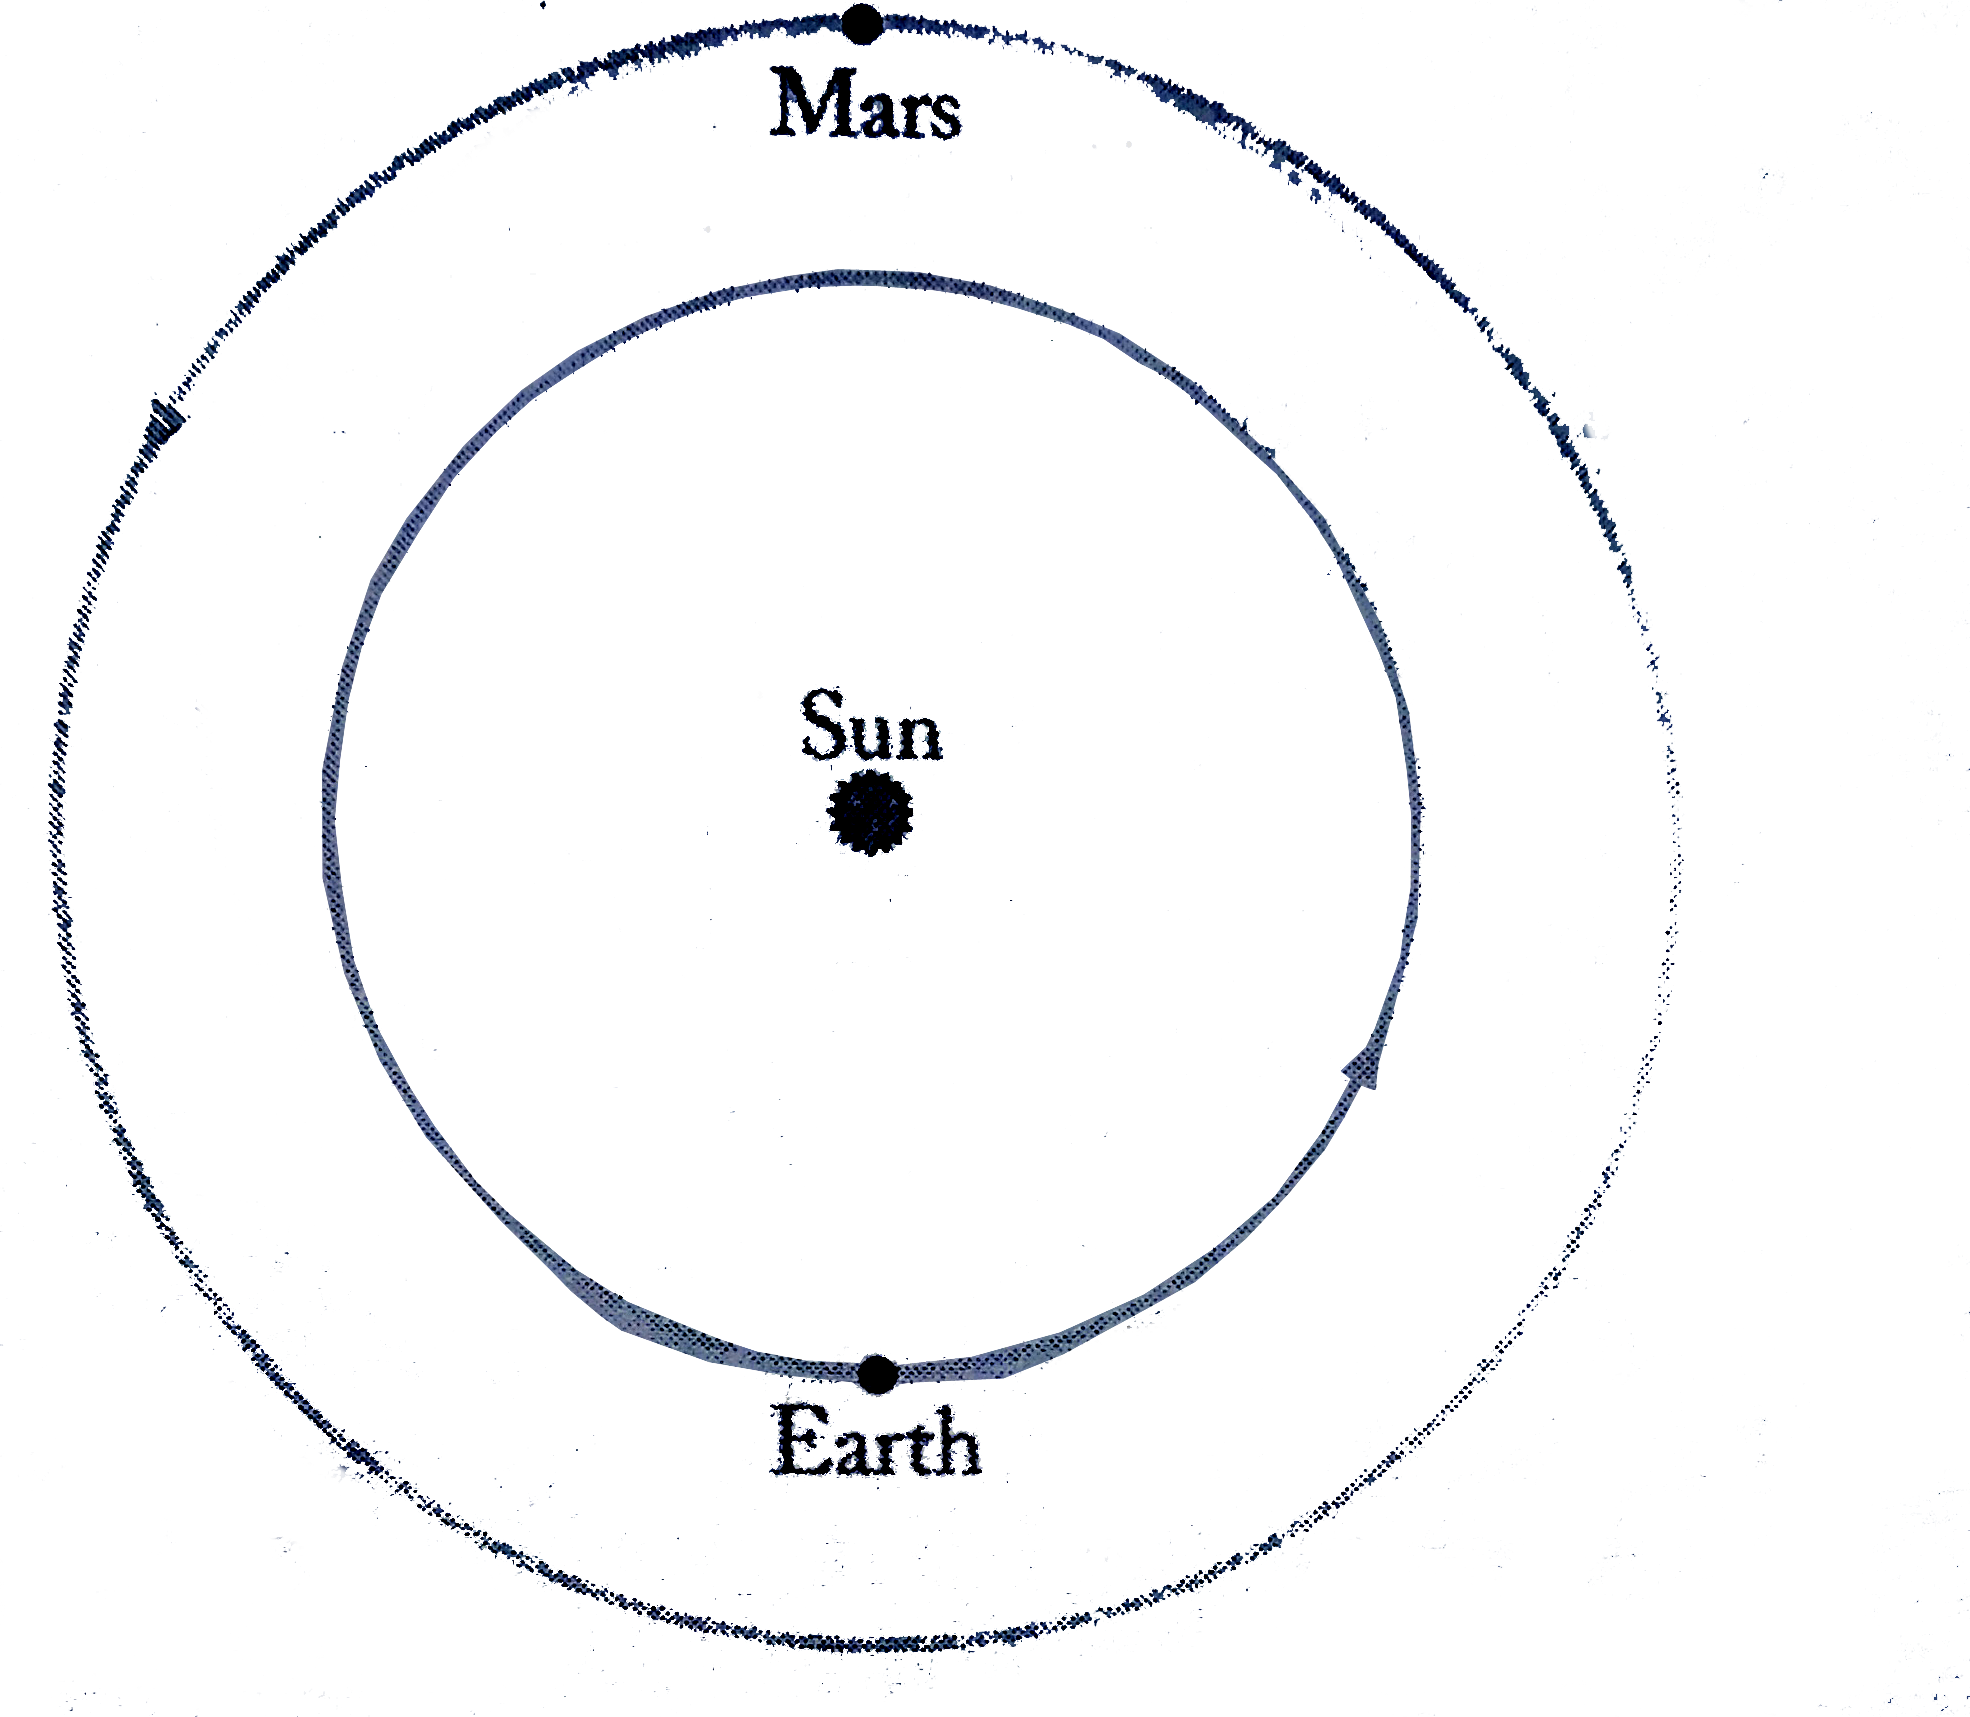 The Earth has  a circular orbit of radius r and period t around the sum, Mars has a circular orbit of radius R and period T. In order to send a spacecraft from the Earth to Mars, it is convenient to launch the spacecraft inot an elliptical orbit whose perihelion coincides with the orbit of the Earth and whose aphelion coincides with the orbit of Mars, this orbit requires the least amount of energy for a trip to Mars. The time t' taken by a spacecraft to reach Mars from the Earth satisfies: